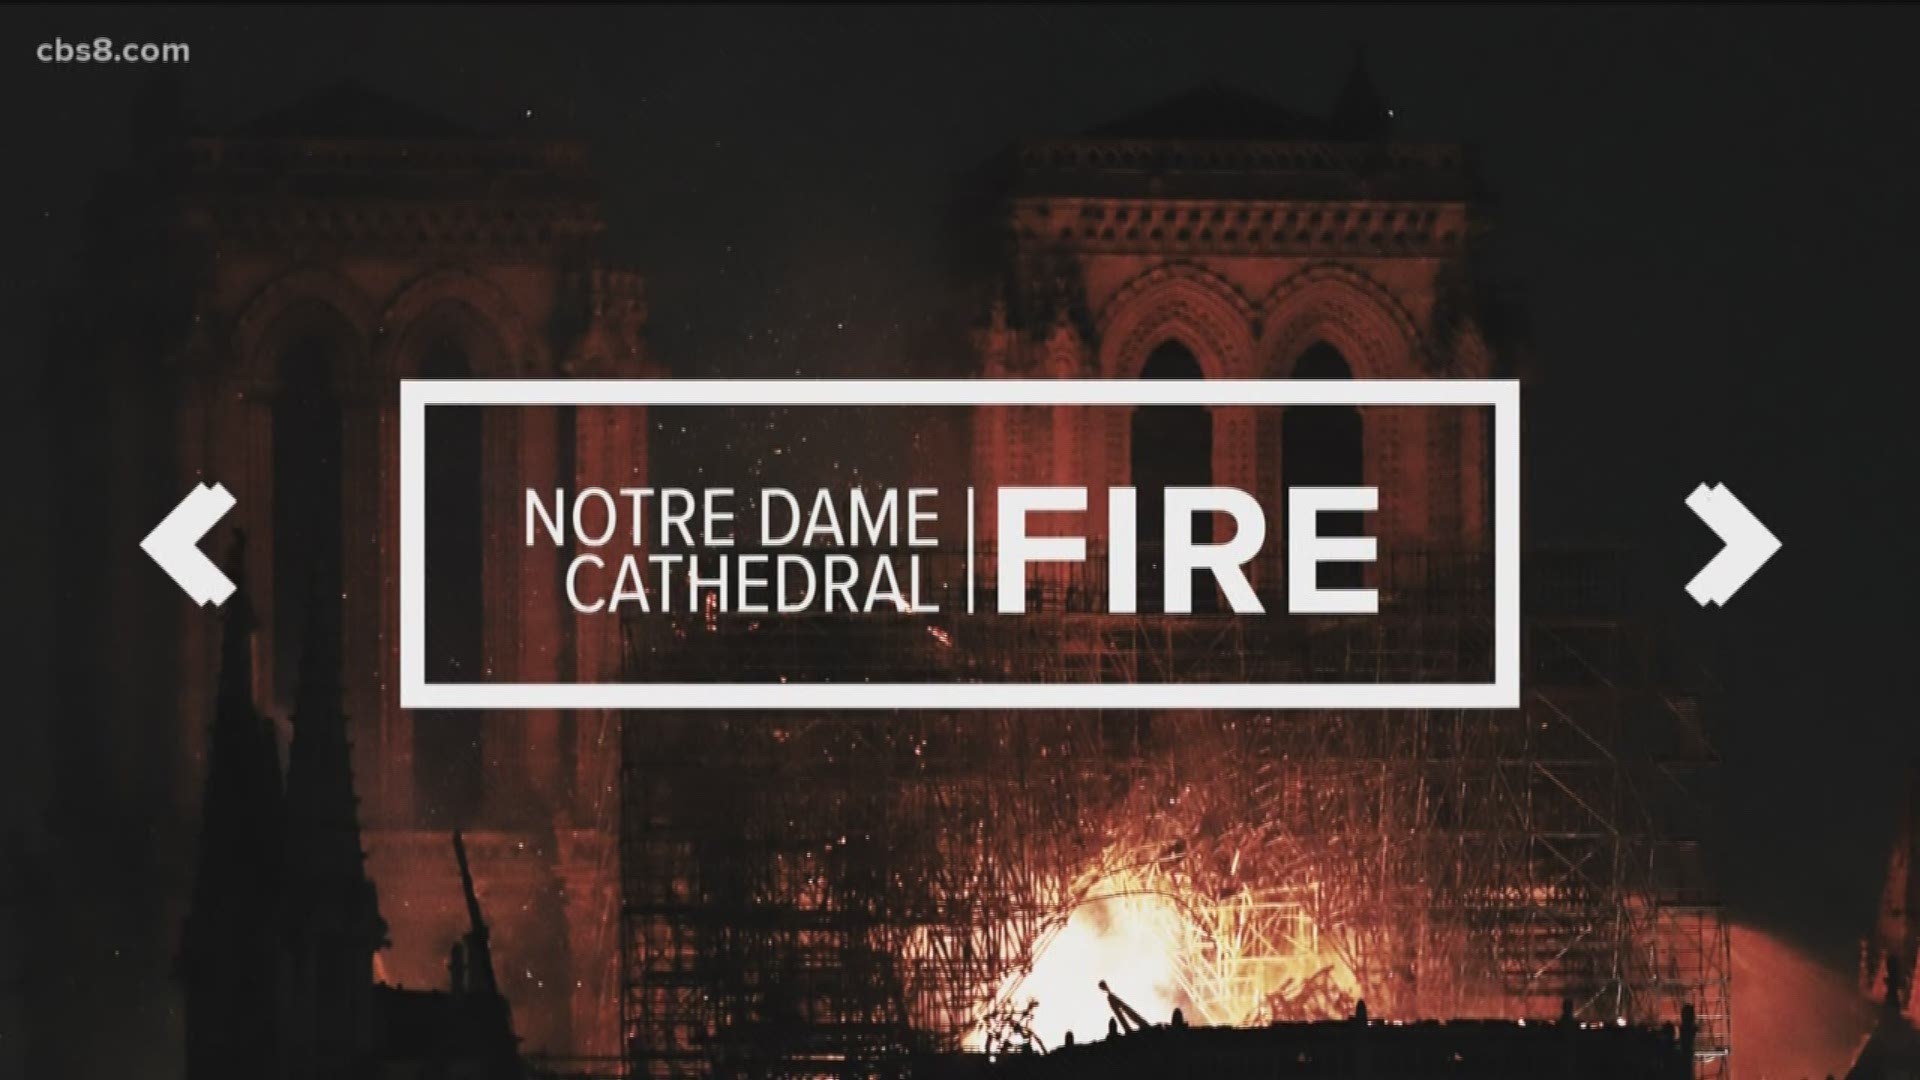 In the aftermath of the Notre Dame fire in Paris Monday, prayers and tributes continue to pour in - including from many San Diegans who remain in disbelief.